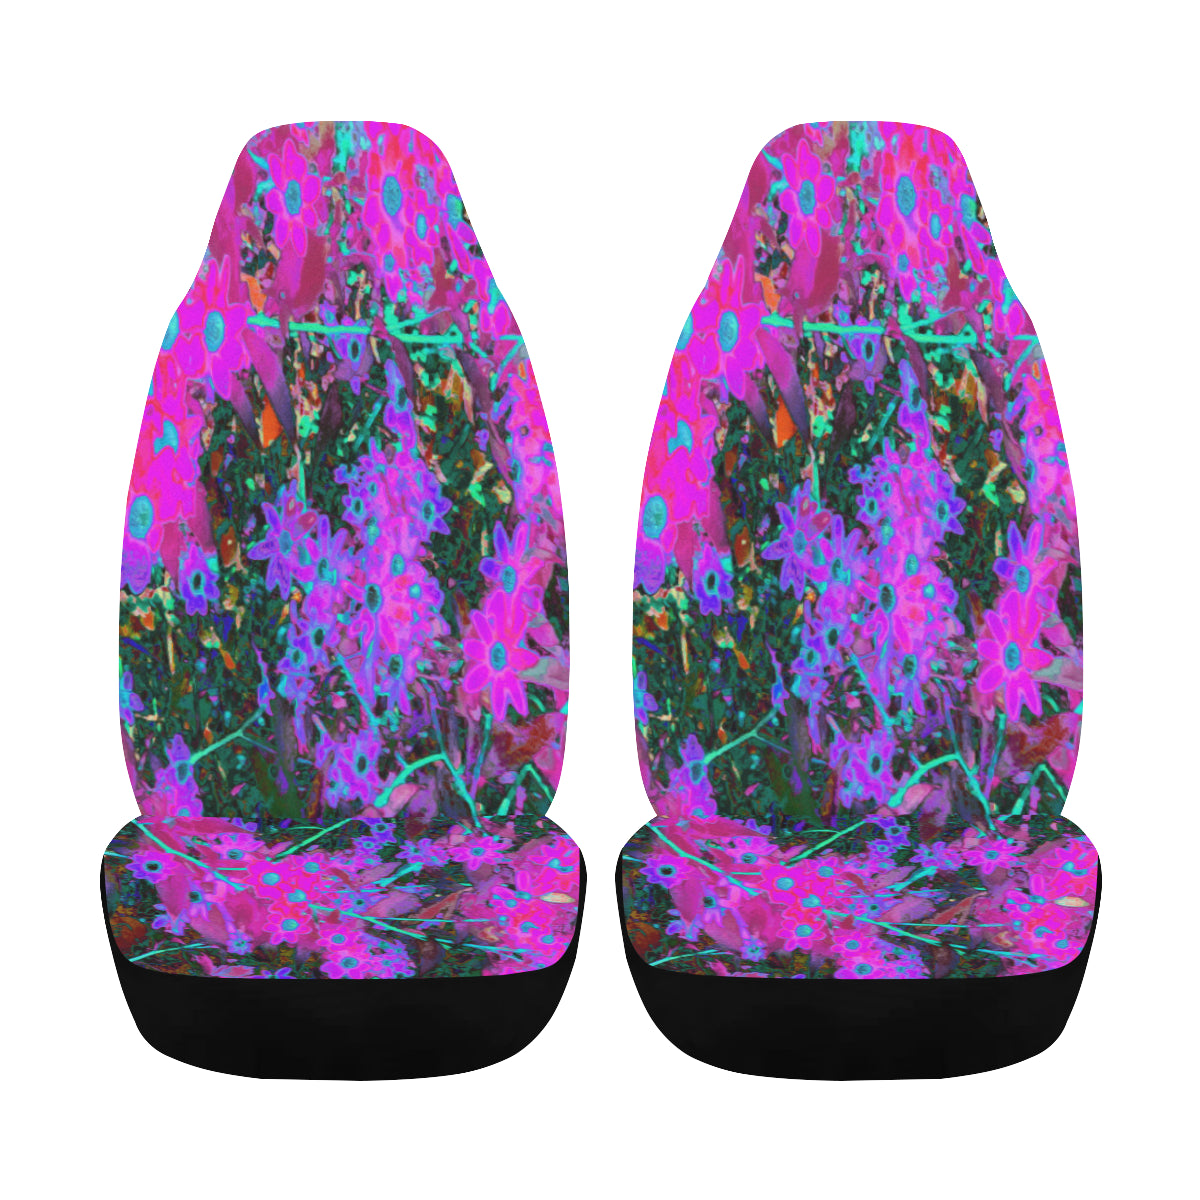 Car Seat Covers, Pretty Hot Pink, Magenta and Aqua Blue Flowers